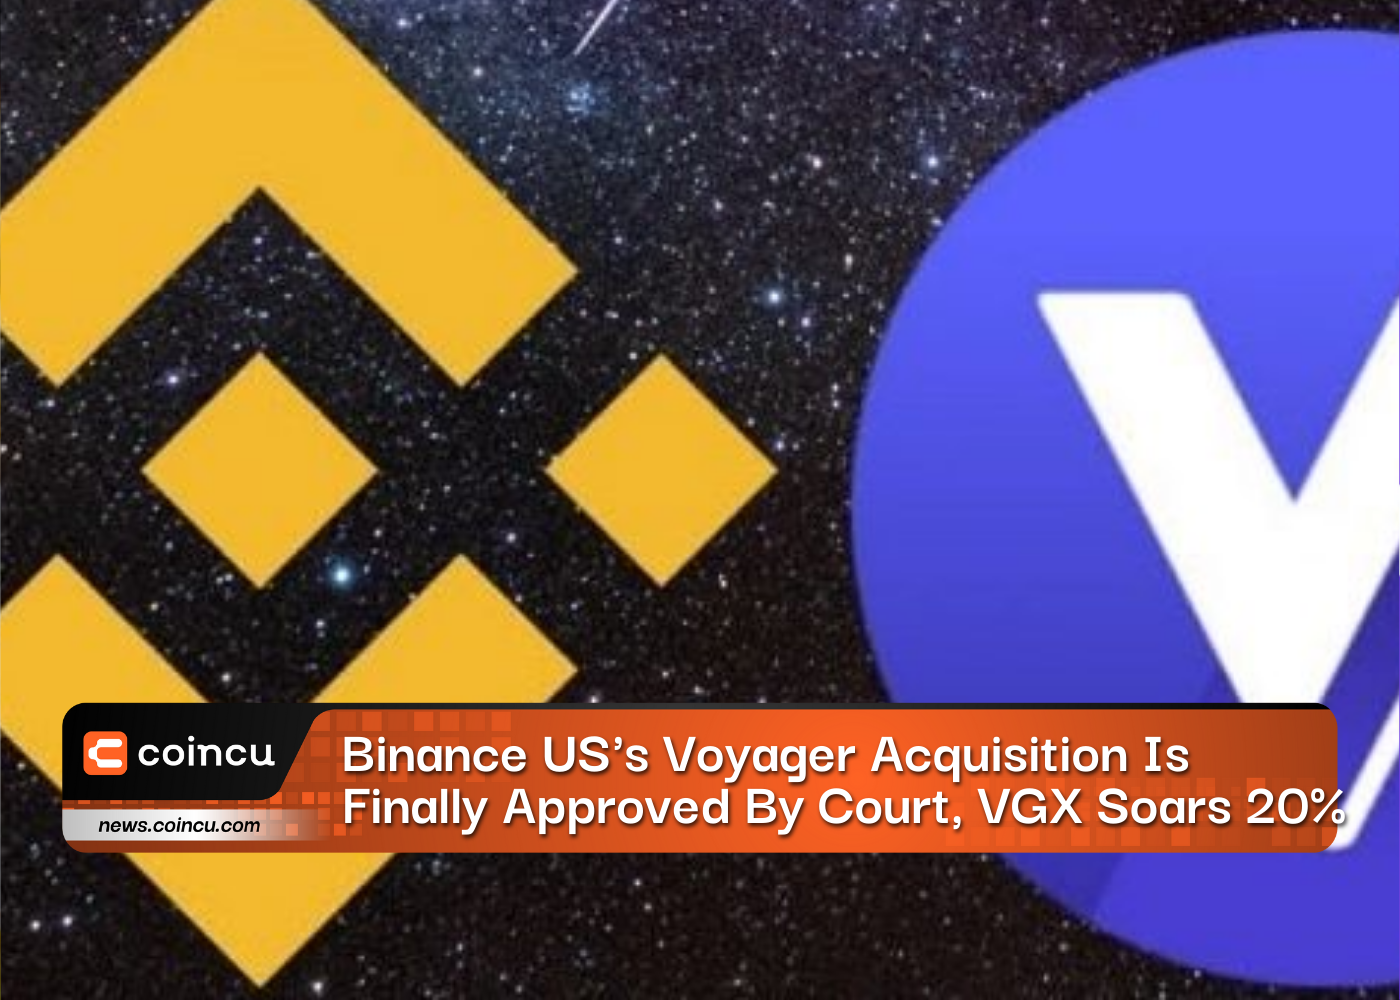 Binance US's Voyager Acquisition Is Finally Approved By Court, VGX Soars 20%